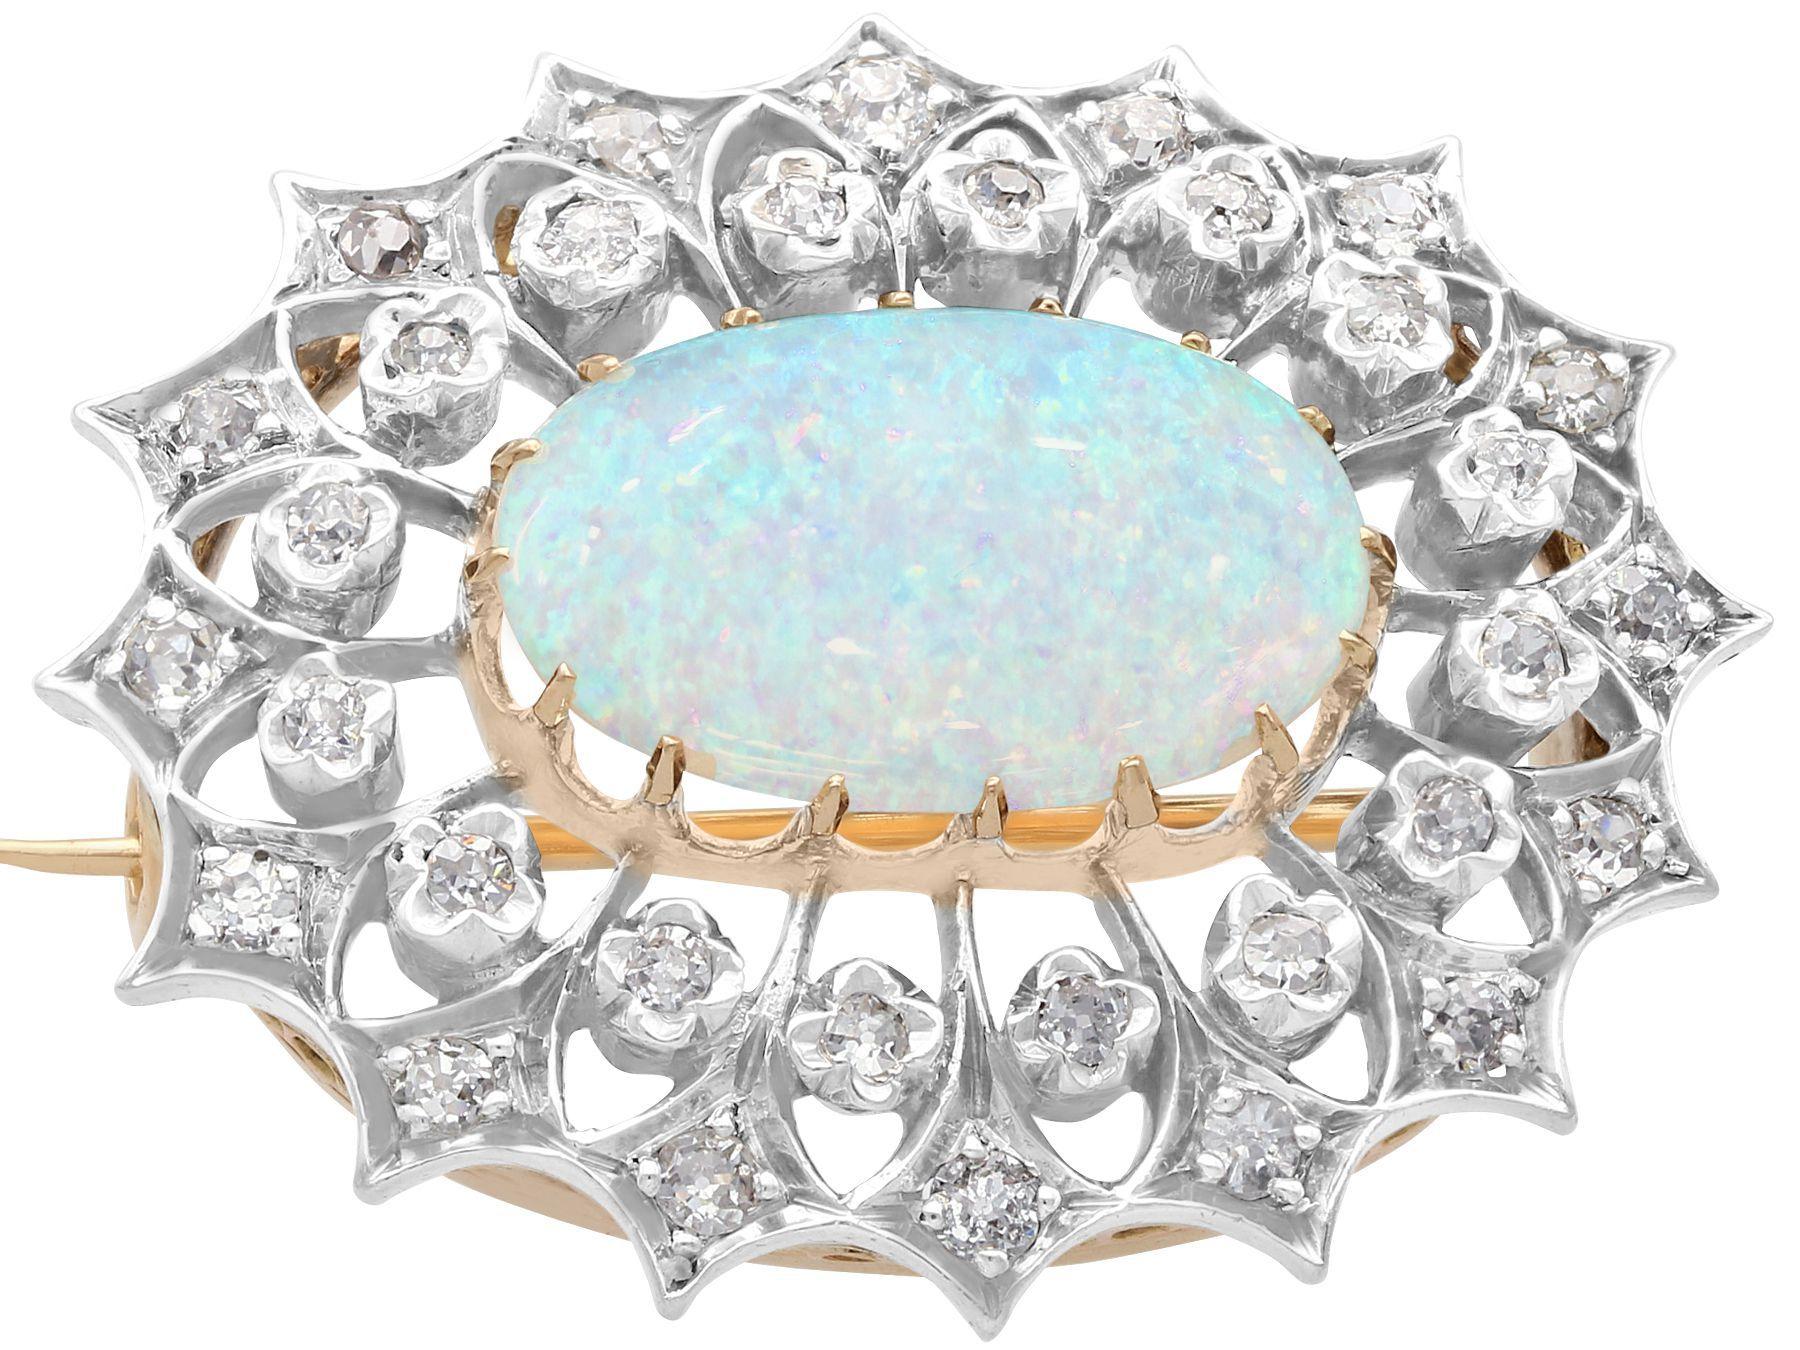 A stunning, fine and impressive Victorian 2.99 carat white opal and 0.96 carat diamond, 9 karat yellow gold and silver set brooch; part of our diverse antique jewelry collections

This stunning, fine and impressive diamond and opal brooch has been